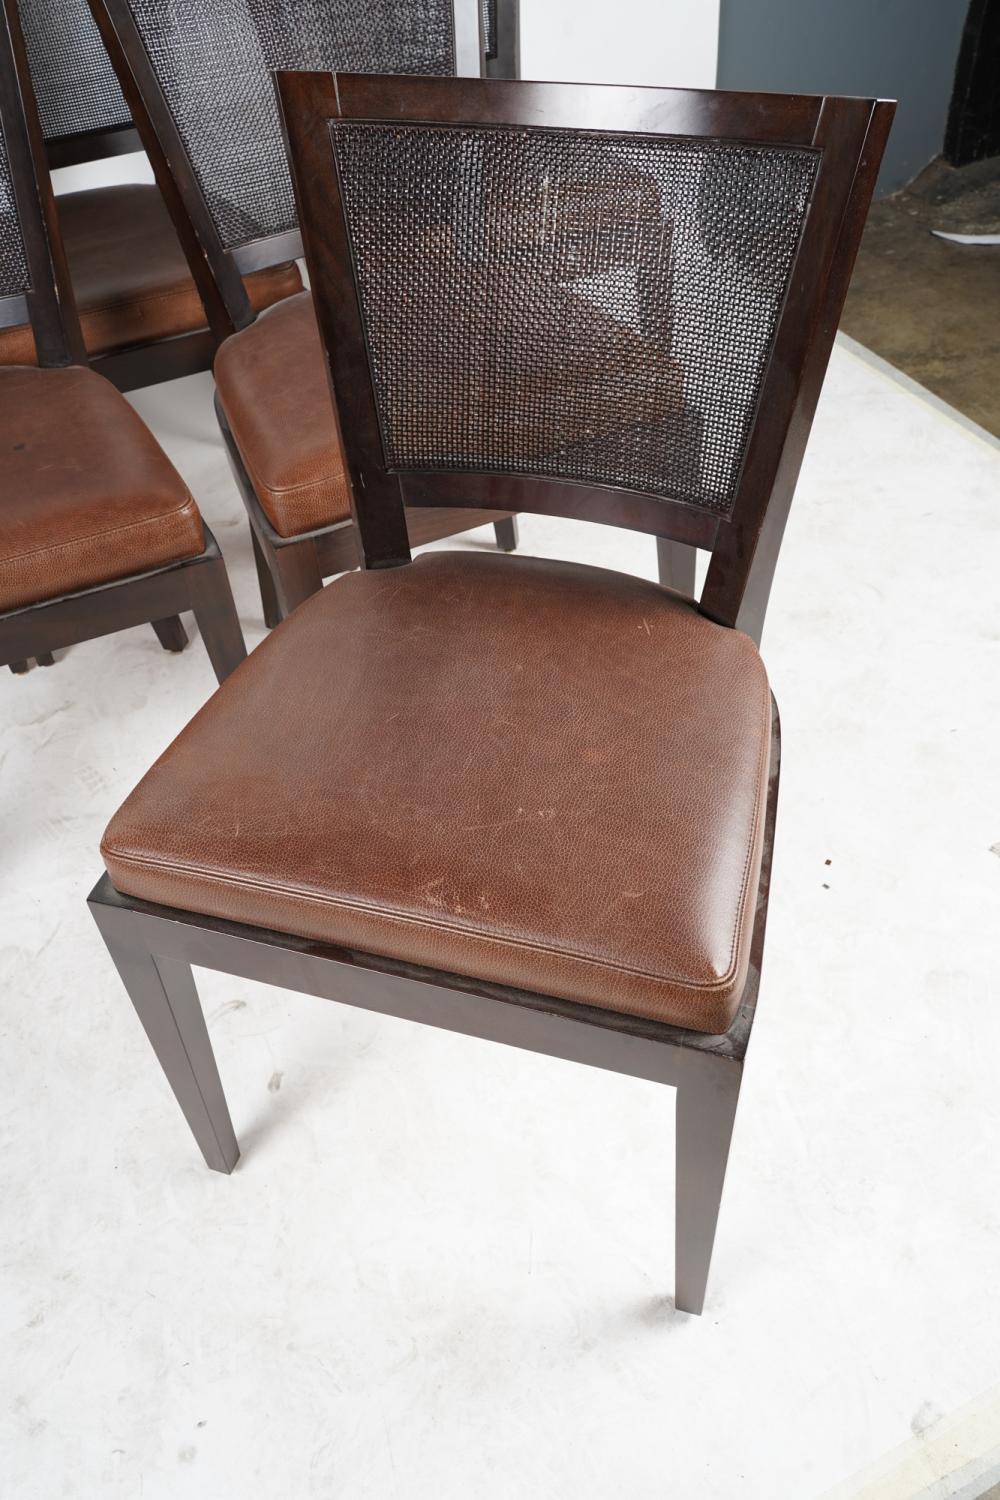 Set Six Promemoria Caffe Caned Leather Dining Chairs Contemporary Italian C 2000 For Sale 3